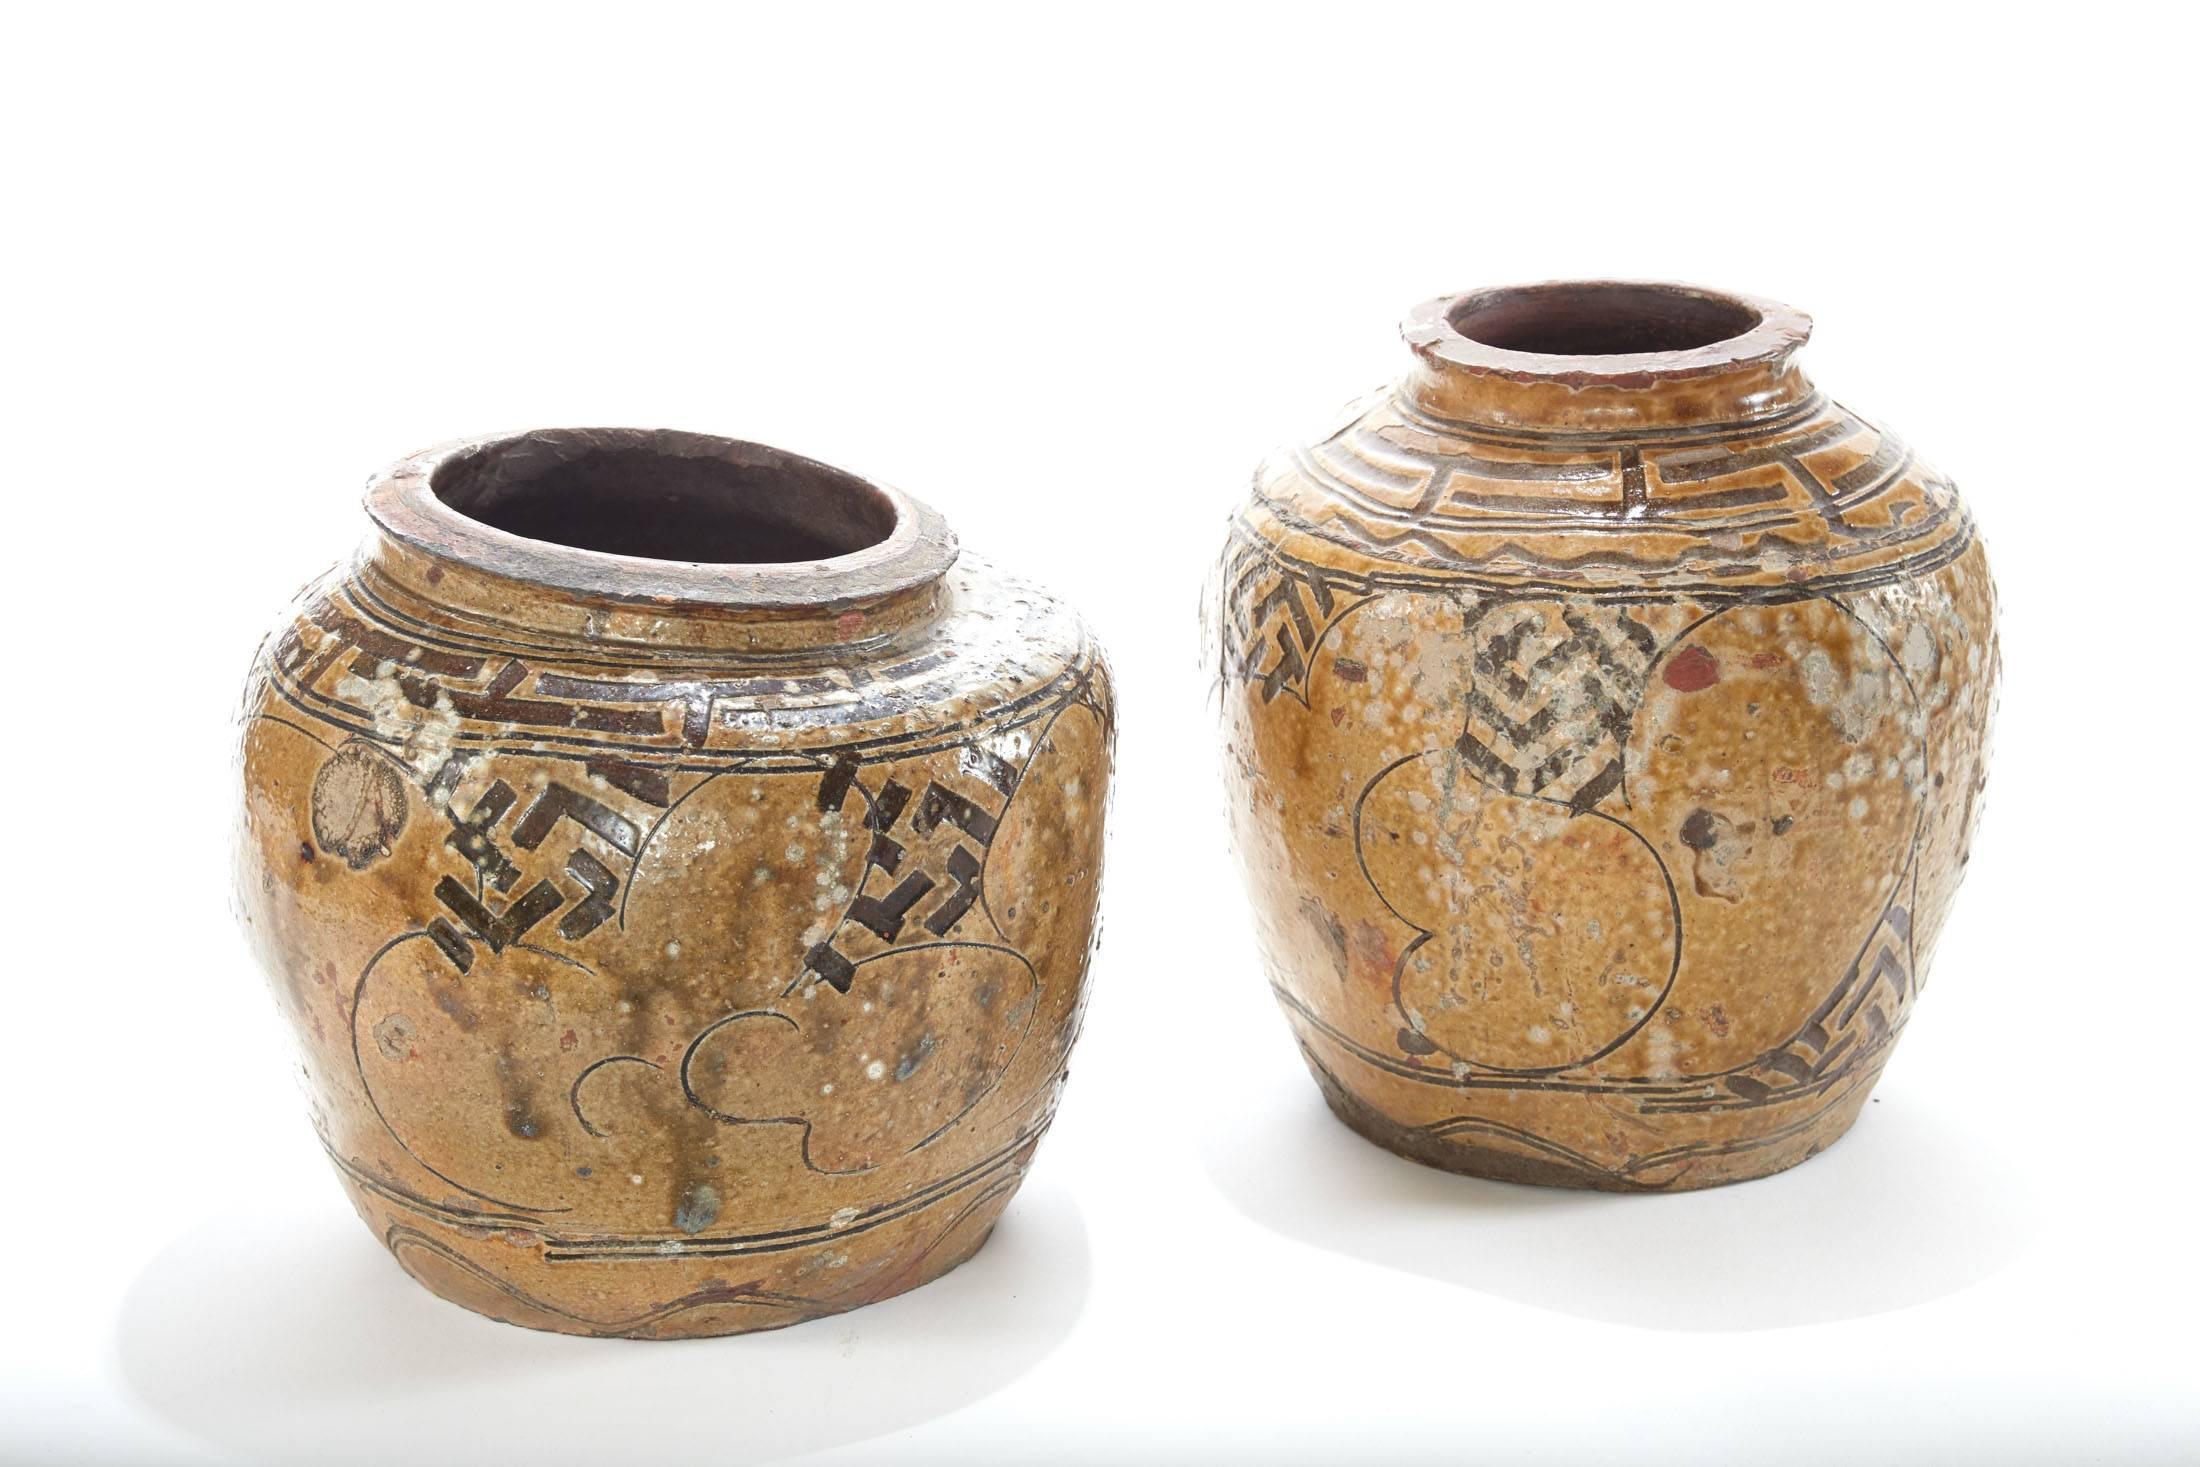 Two of a pair of 19th century glazed Asian pots 
Gorgeous worn and weathered patina
One was smashed during the process of fabrication and has an interesting shape as a result
sold individually but work well as a pair


Dimensions from left to